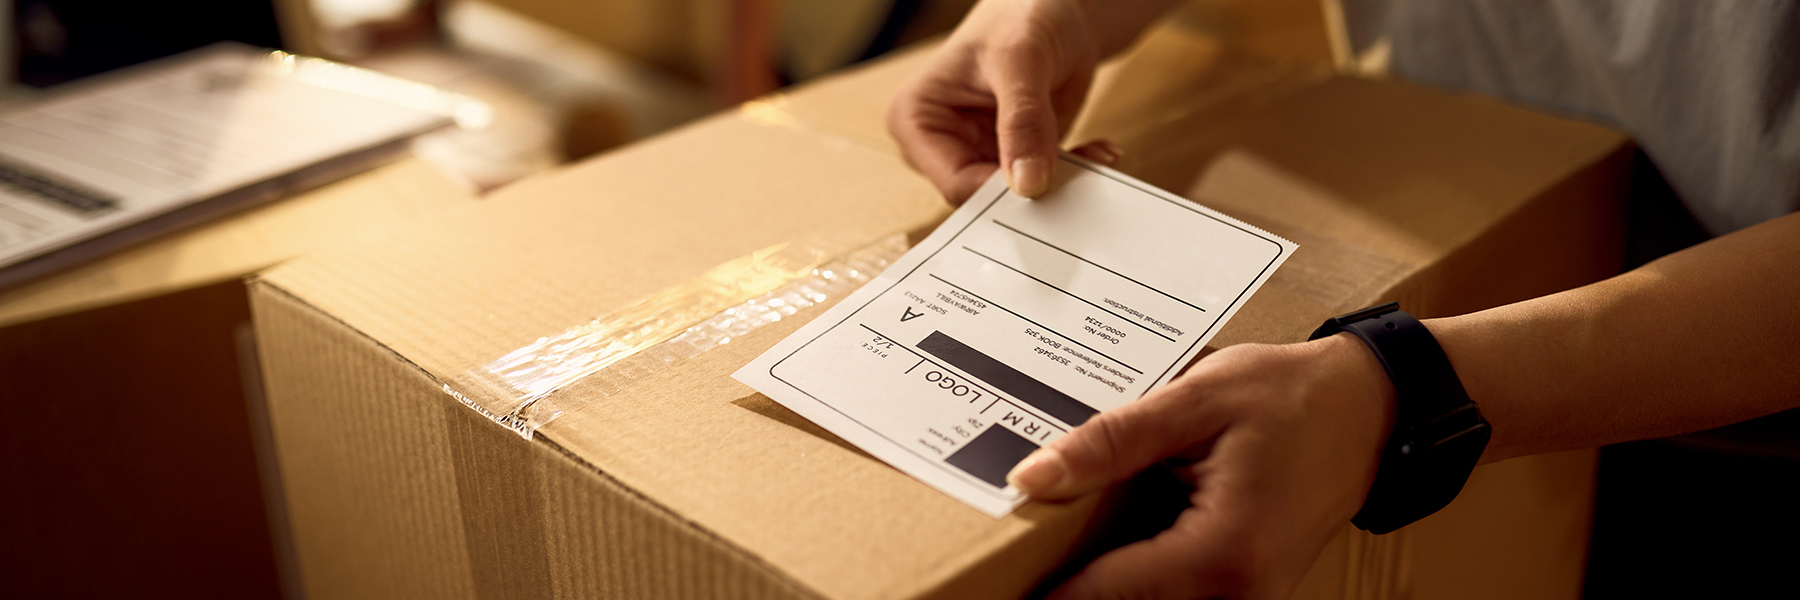 shipping label being placed on box